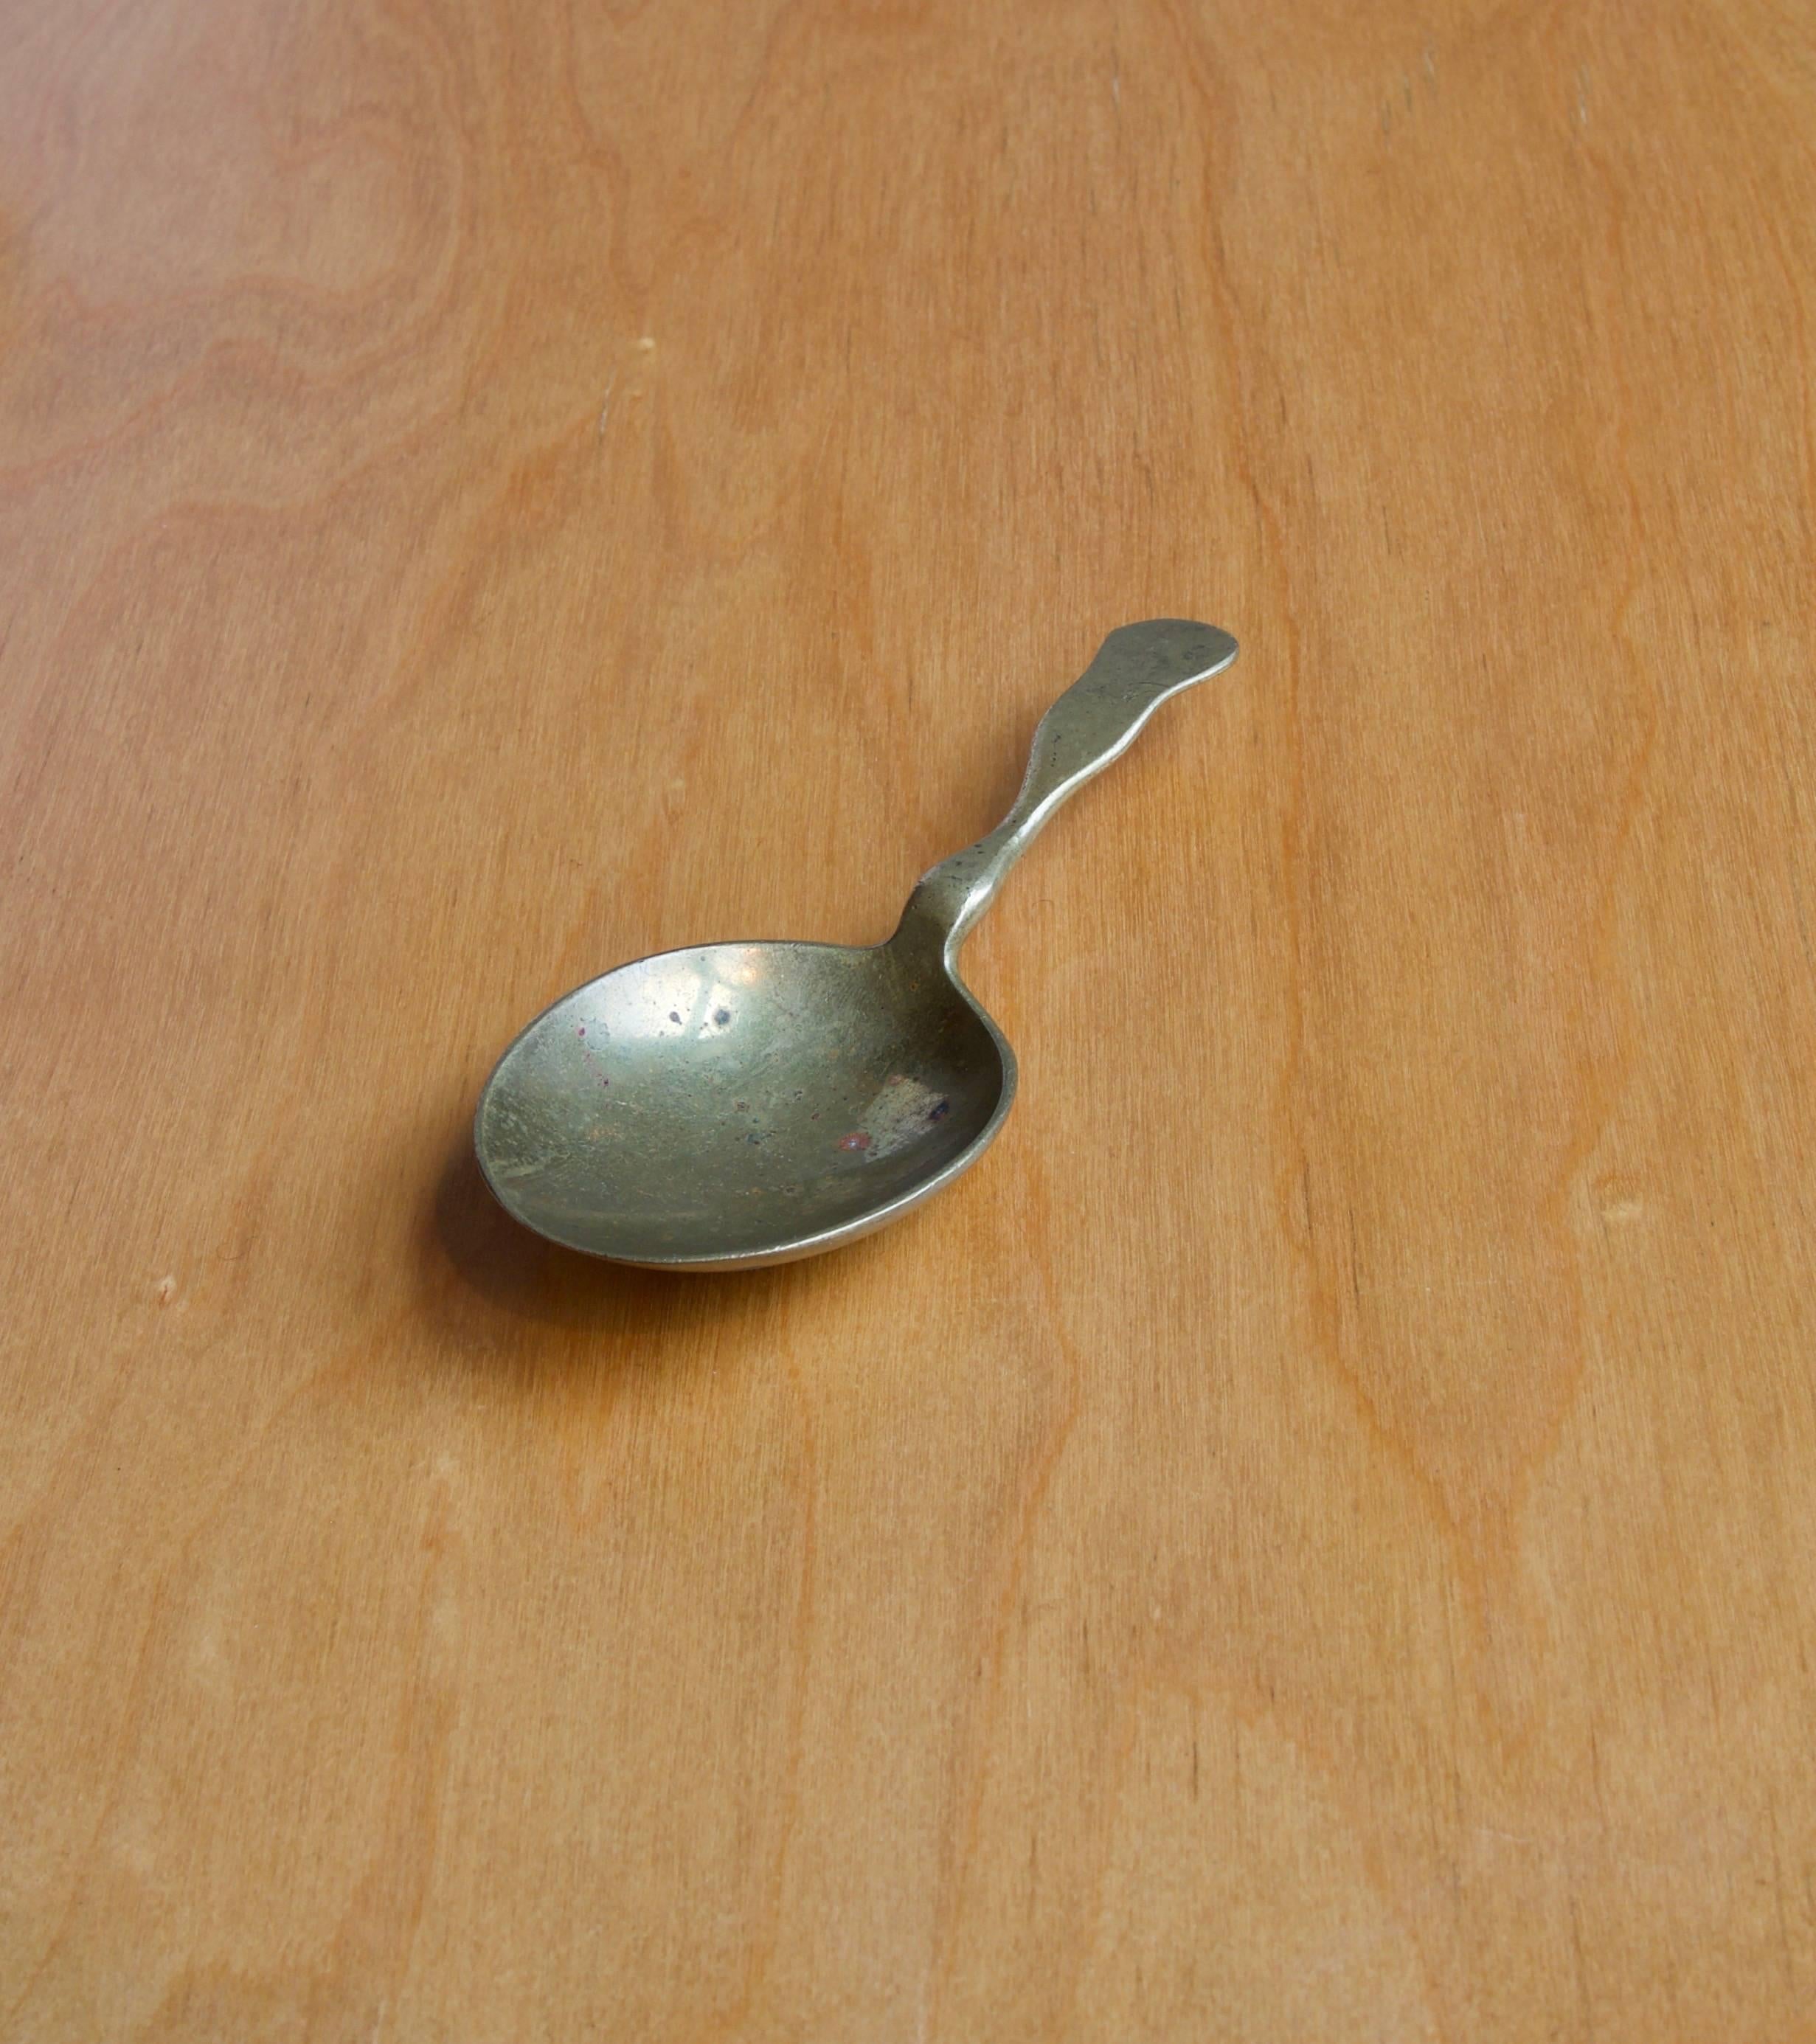 A sculptural solid cast-brass spoon, model number 4565, designed and made by Carl Auböck, Vienna.
The lines and weight of this piece make it a delight to both look at and use. The spoon is balance so that the handle floats in the air when not in